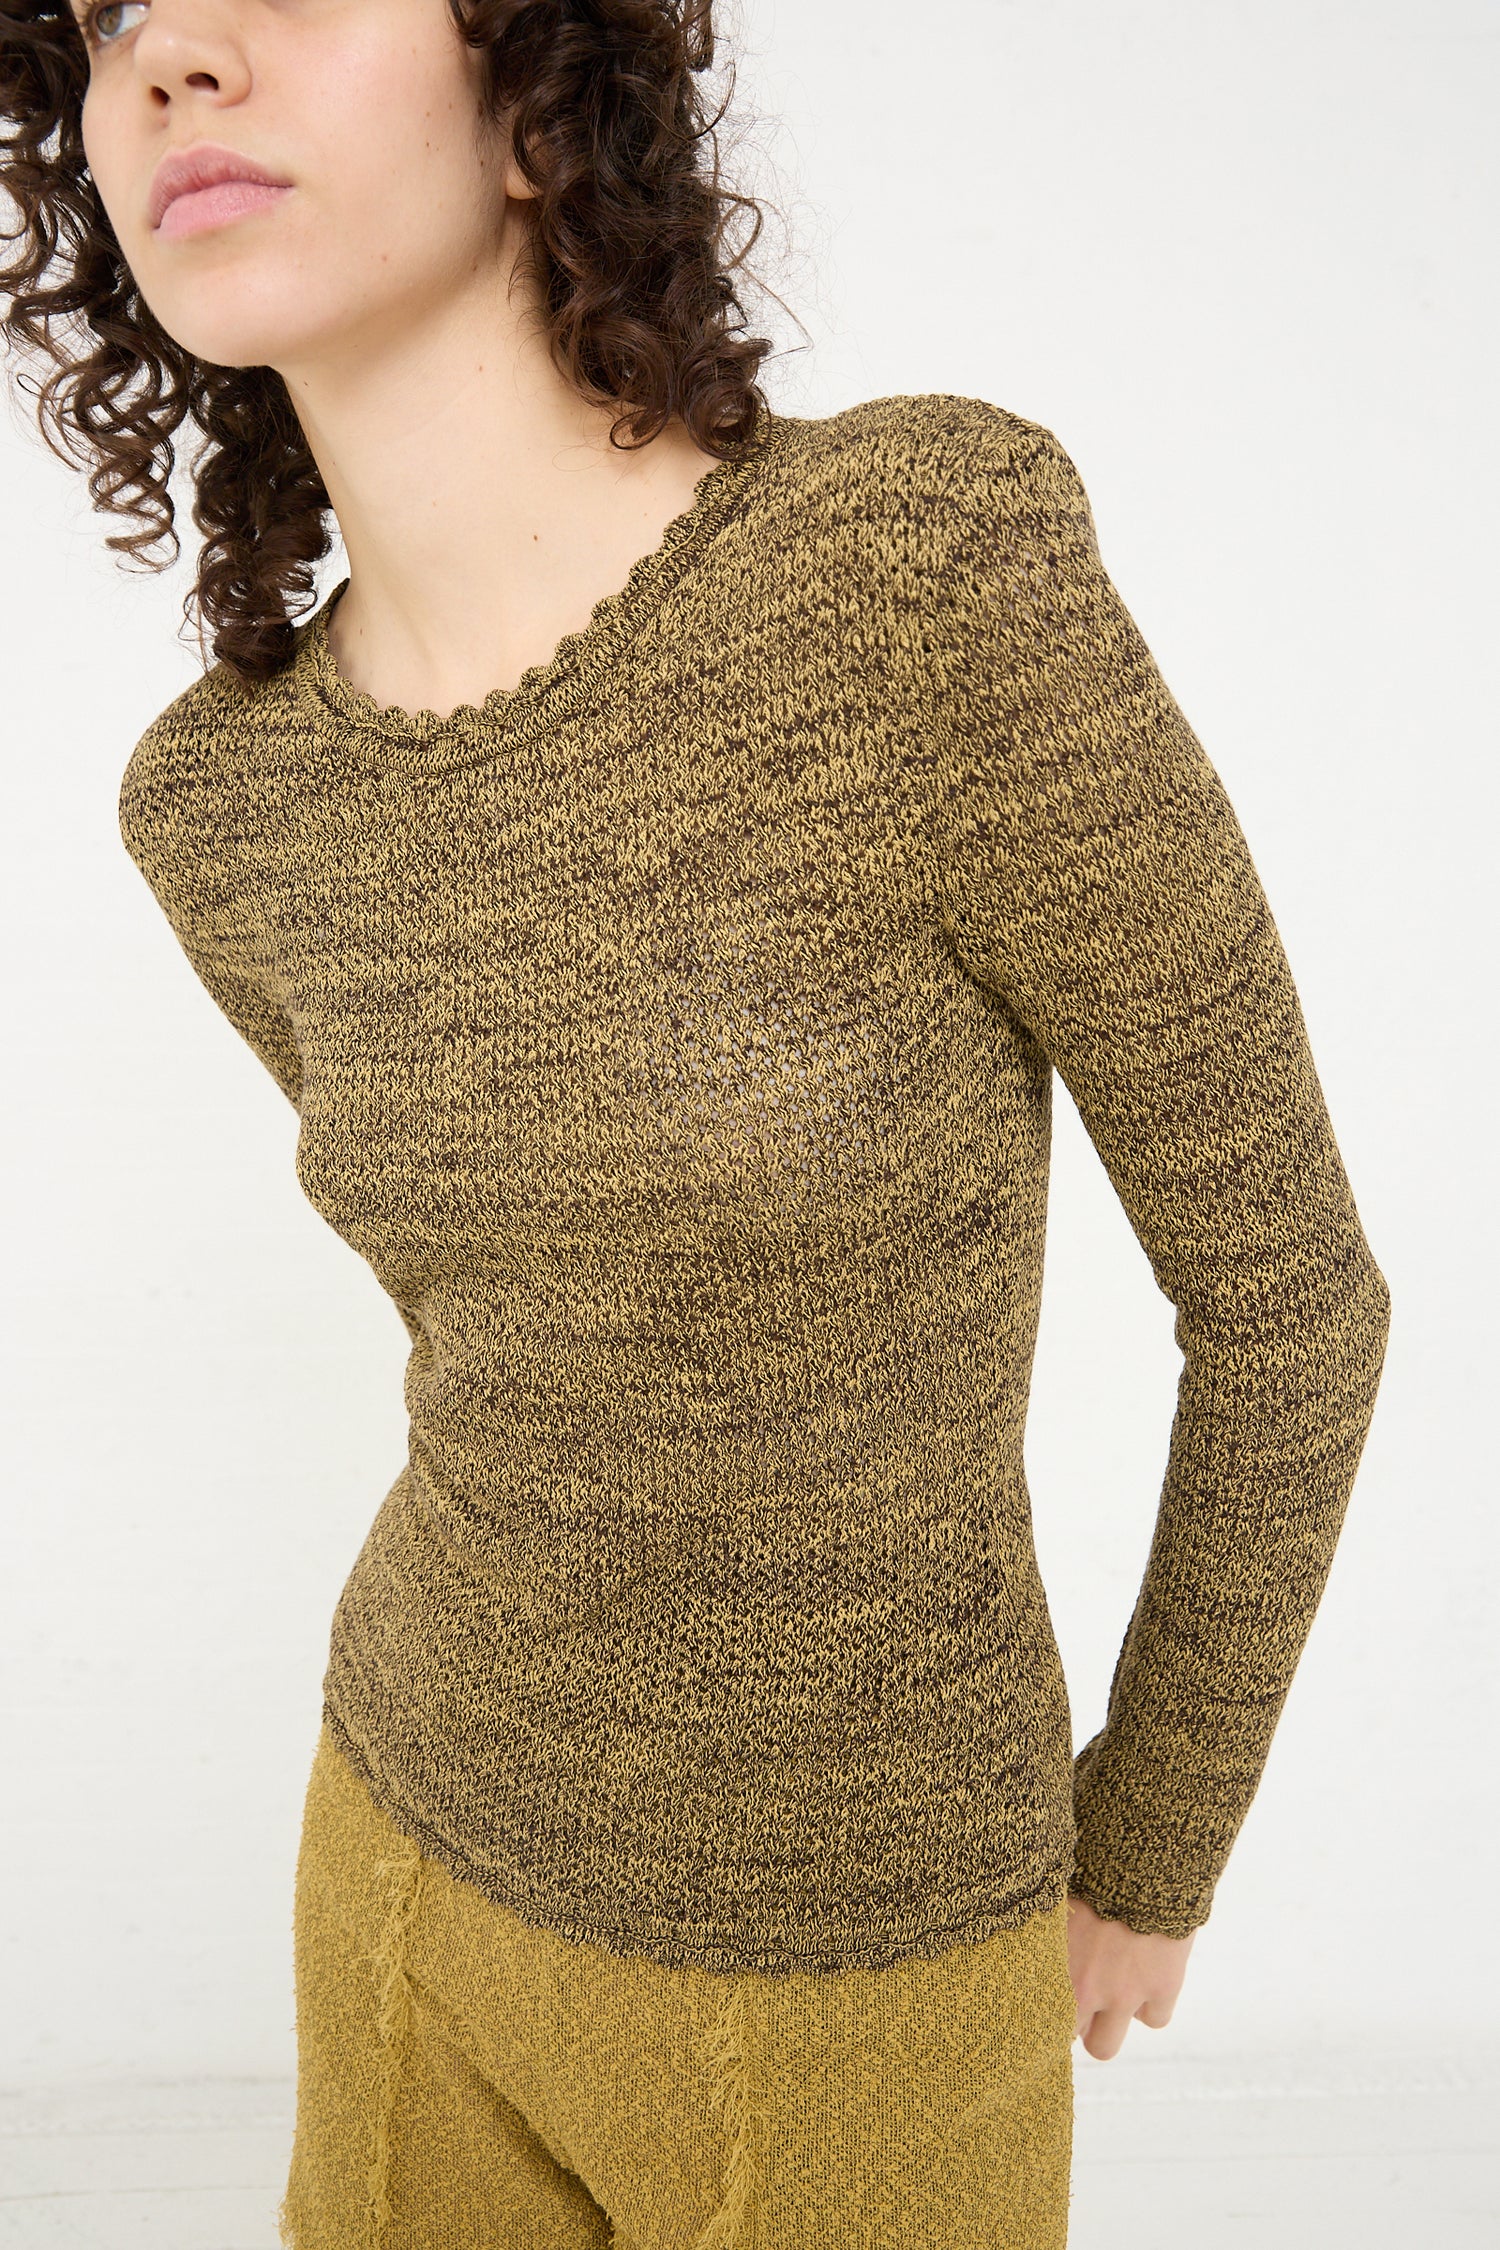 A woman in a yellow Long Sleeve Knit Top in Pepper by Veronique Leroy.